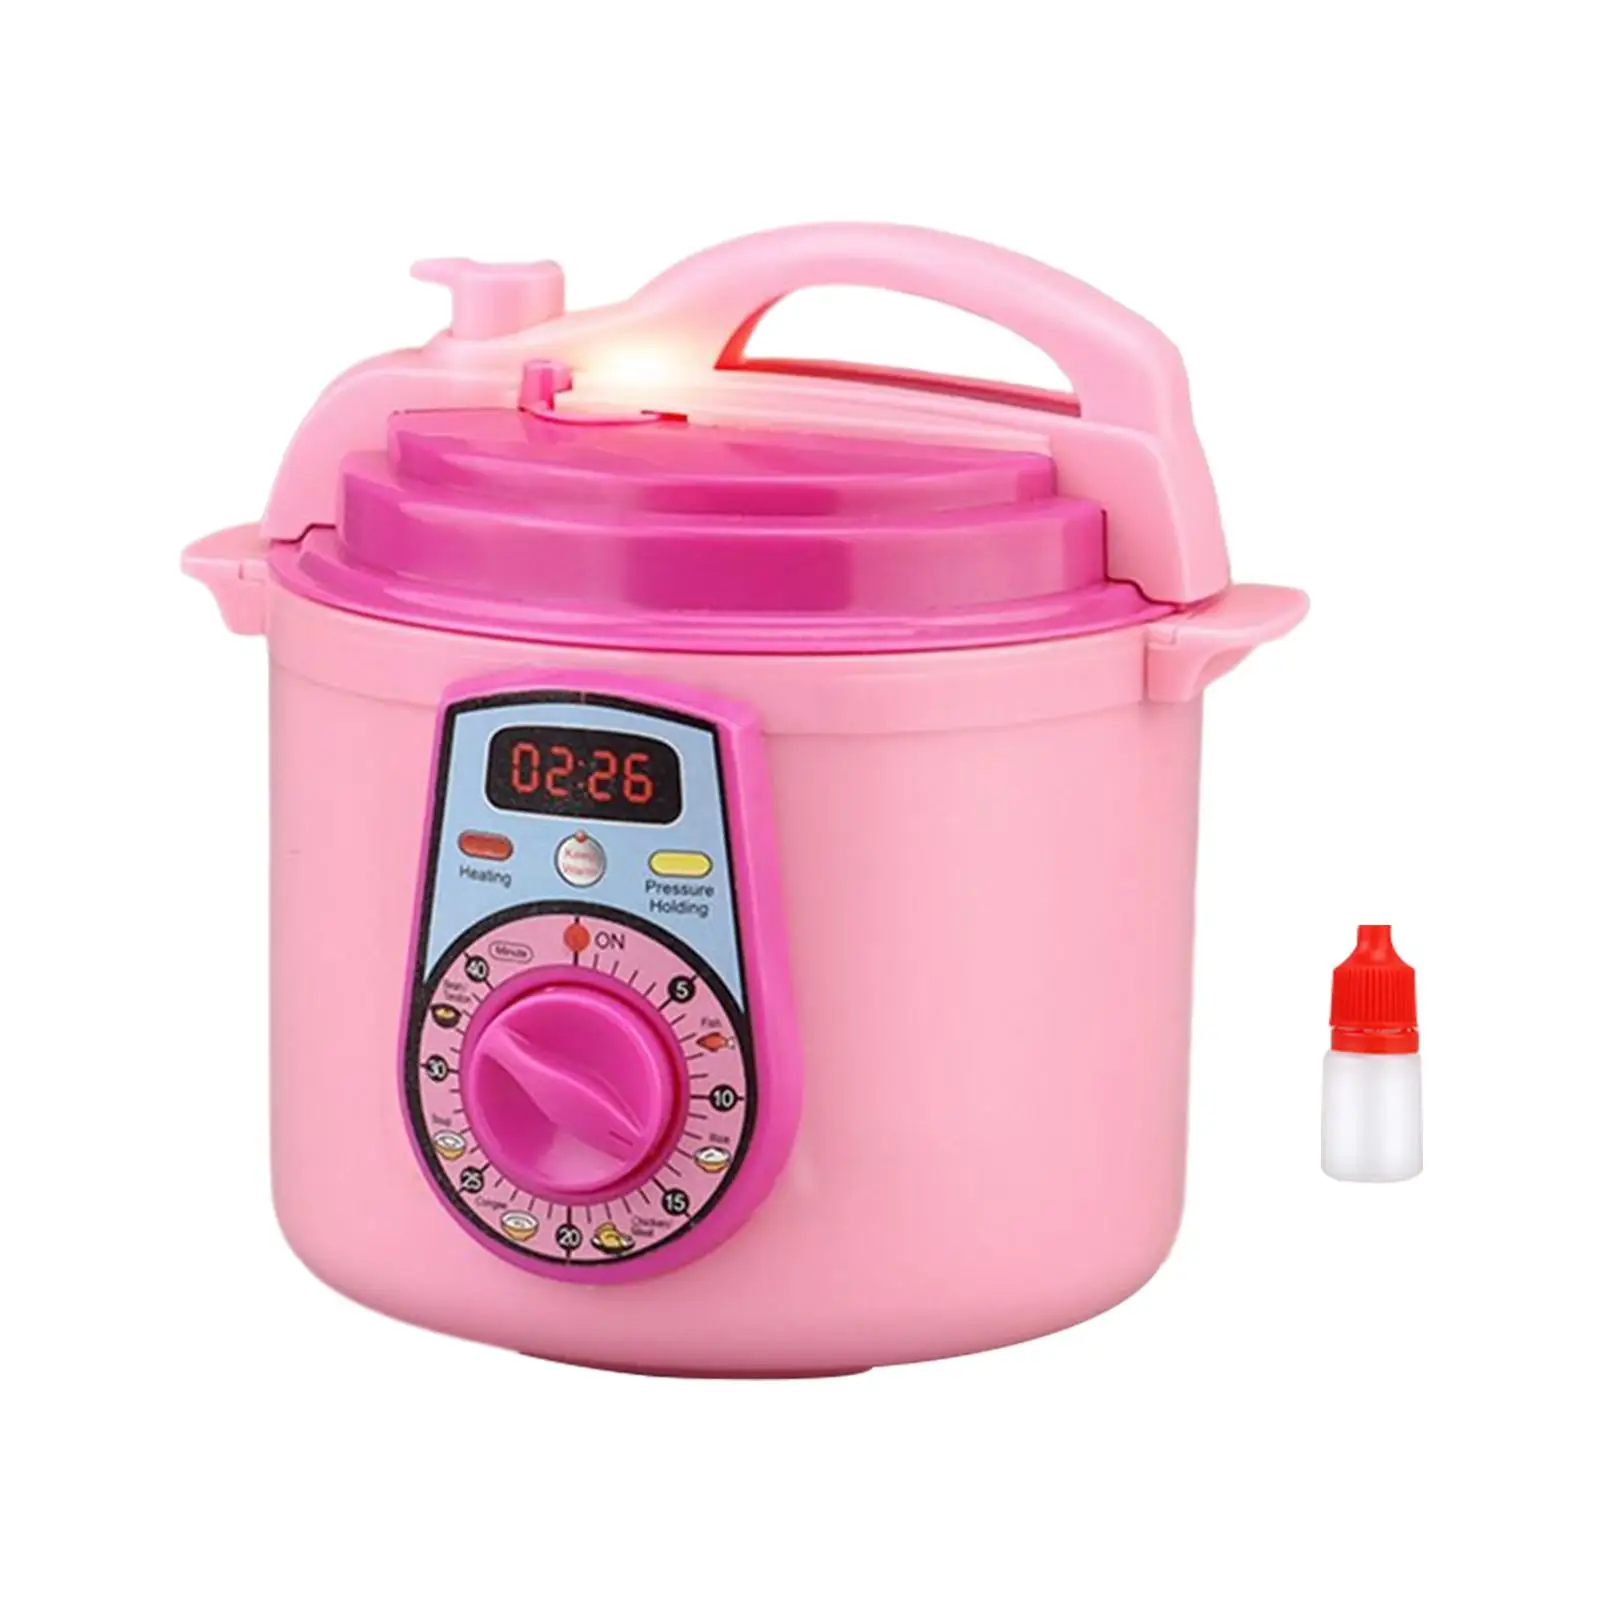 Electric Rice Cooker Toy Kitchen Playset Accessories Play Role Game for Kids